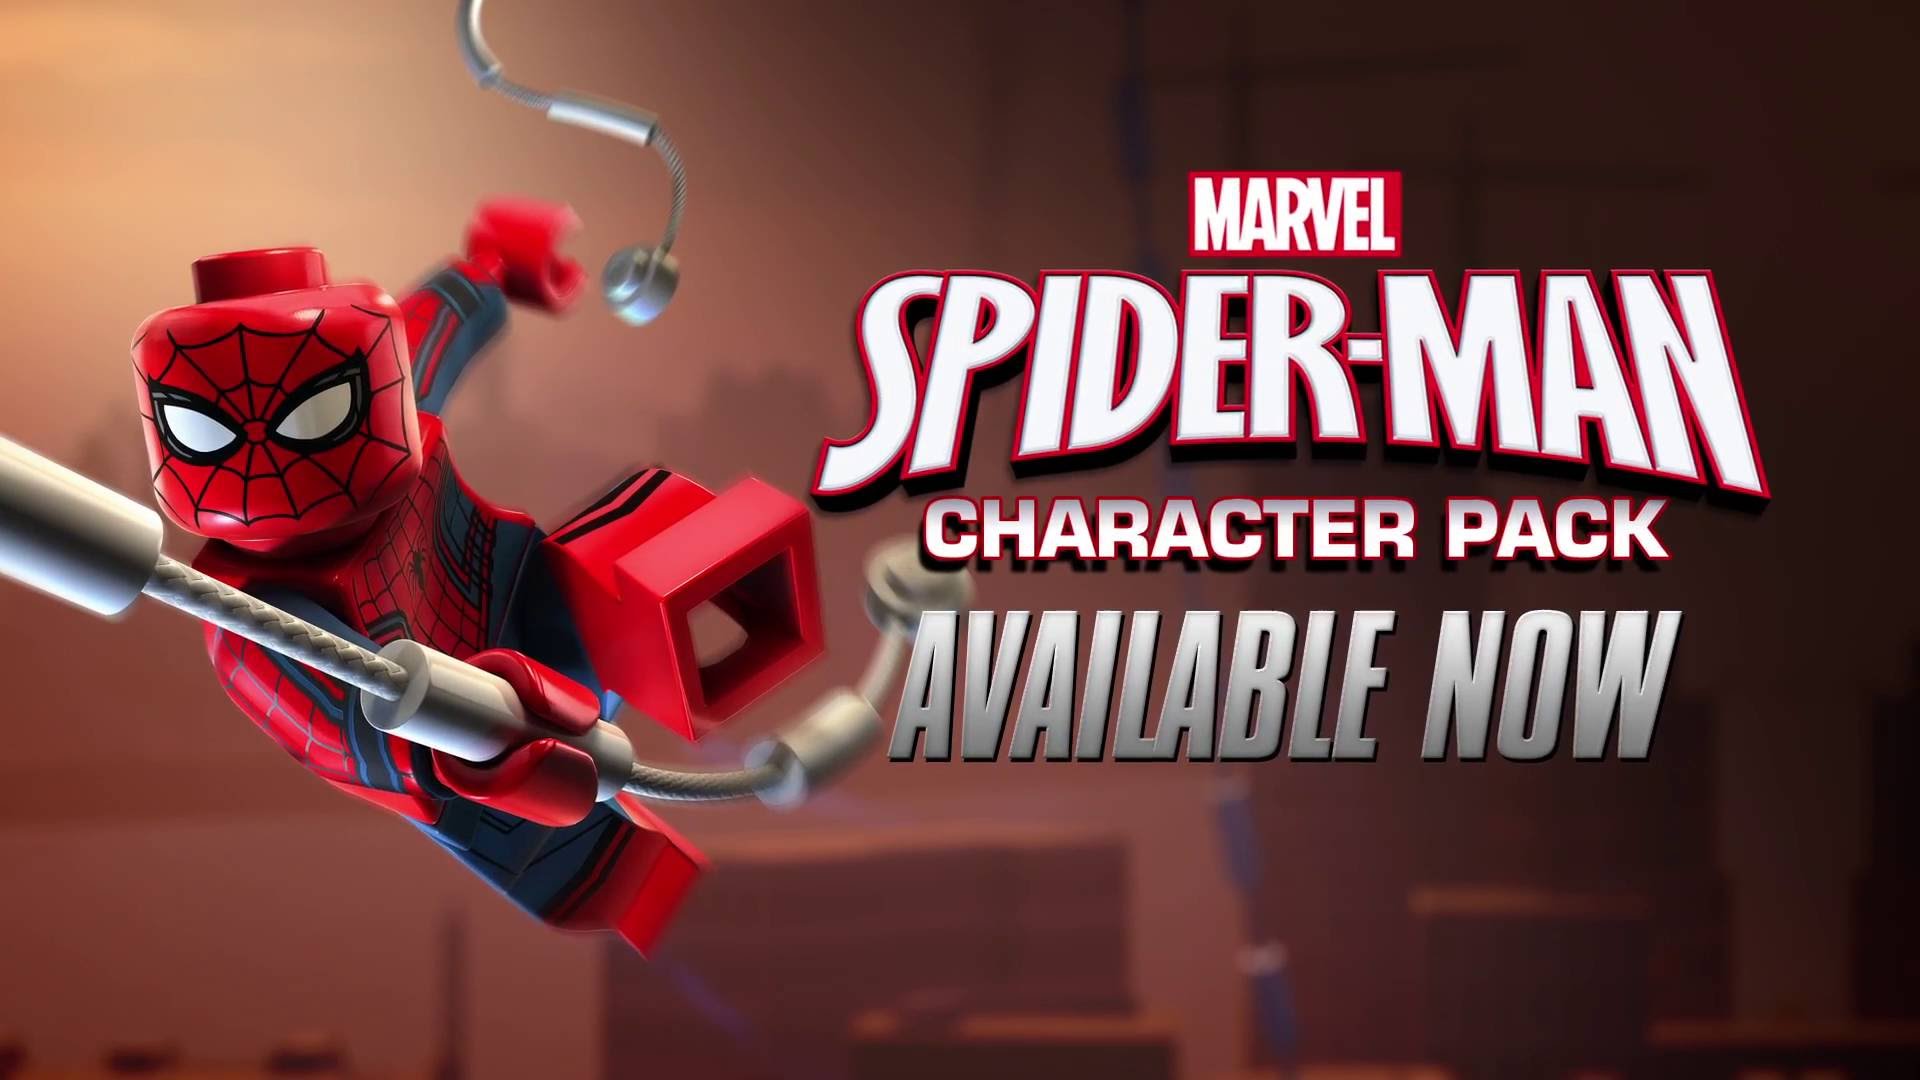 LEGO Marvel’s Avengers: Spider-Man Character Pack in arrivo il 24 maggio